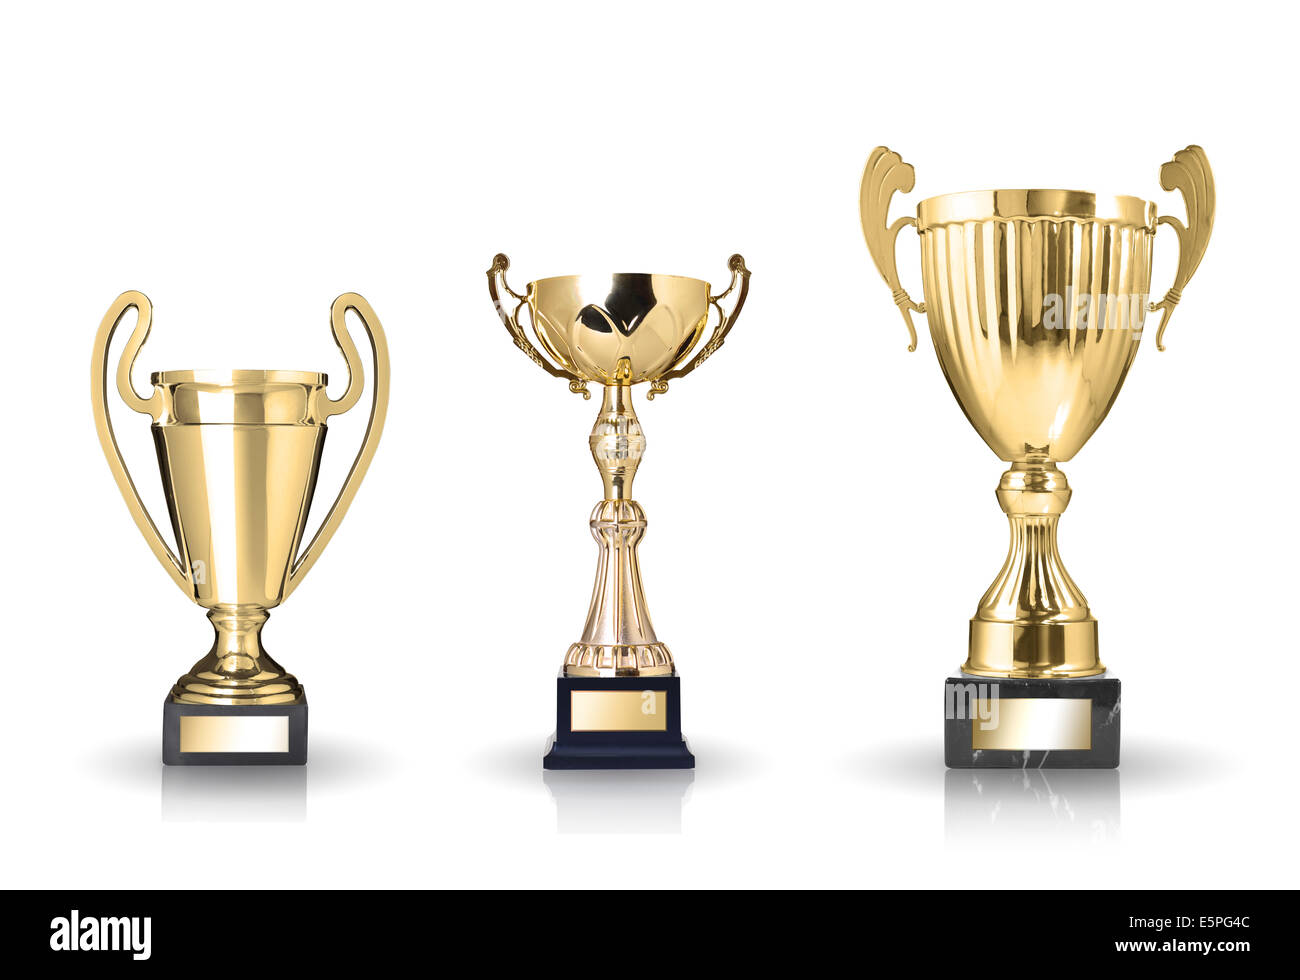 three different kind of golden trophies. Isolated on white background Stock Photo